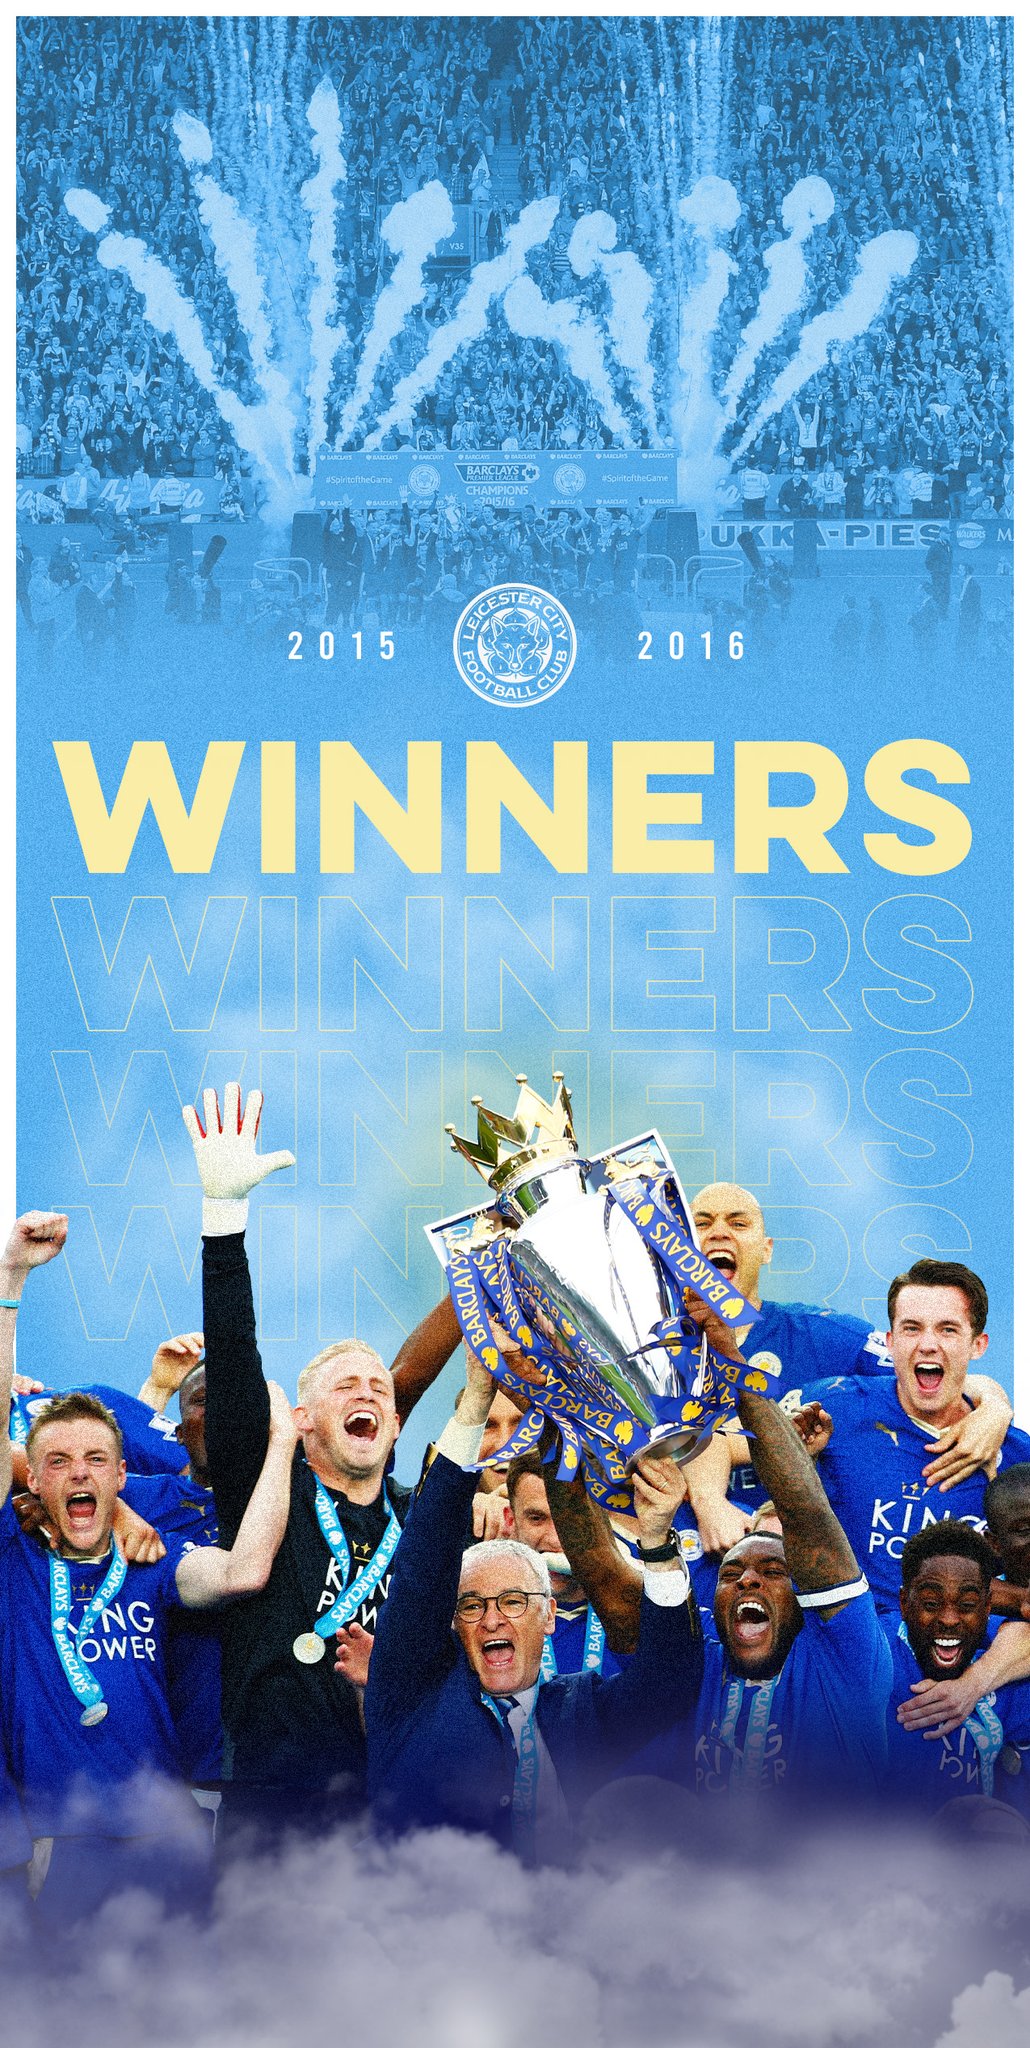 Leicester City F.C. Wallpapers